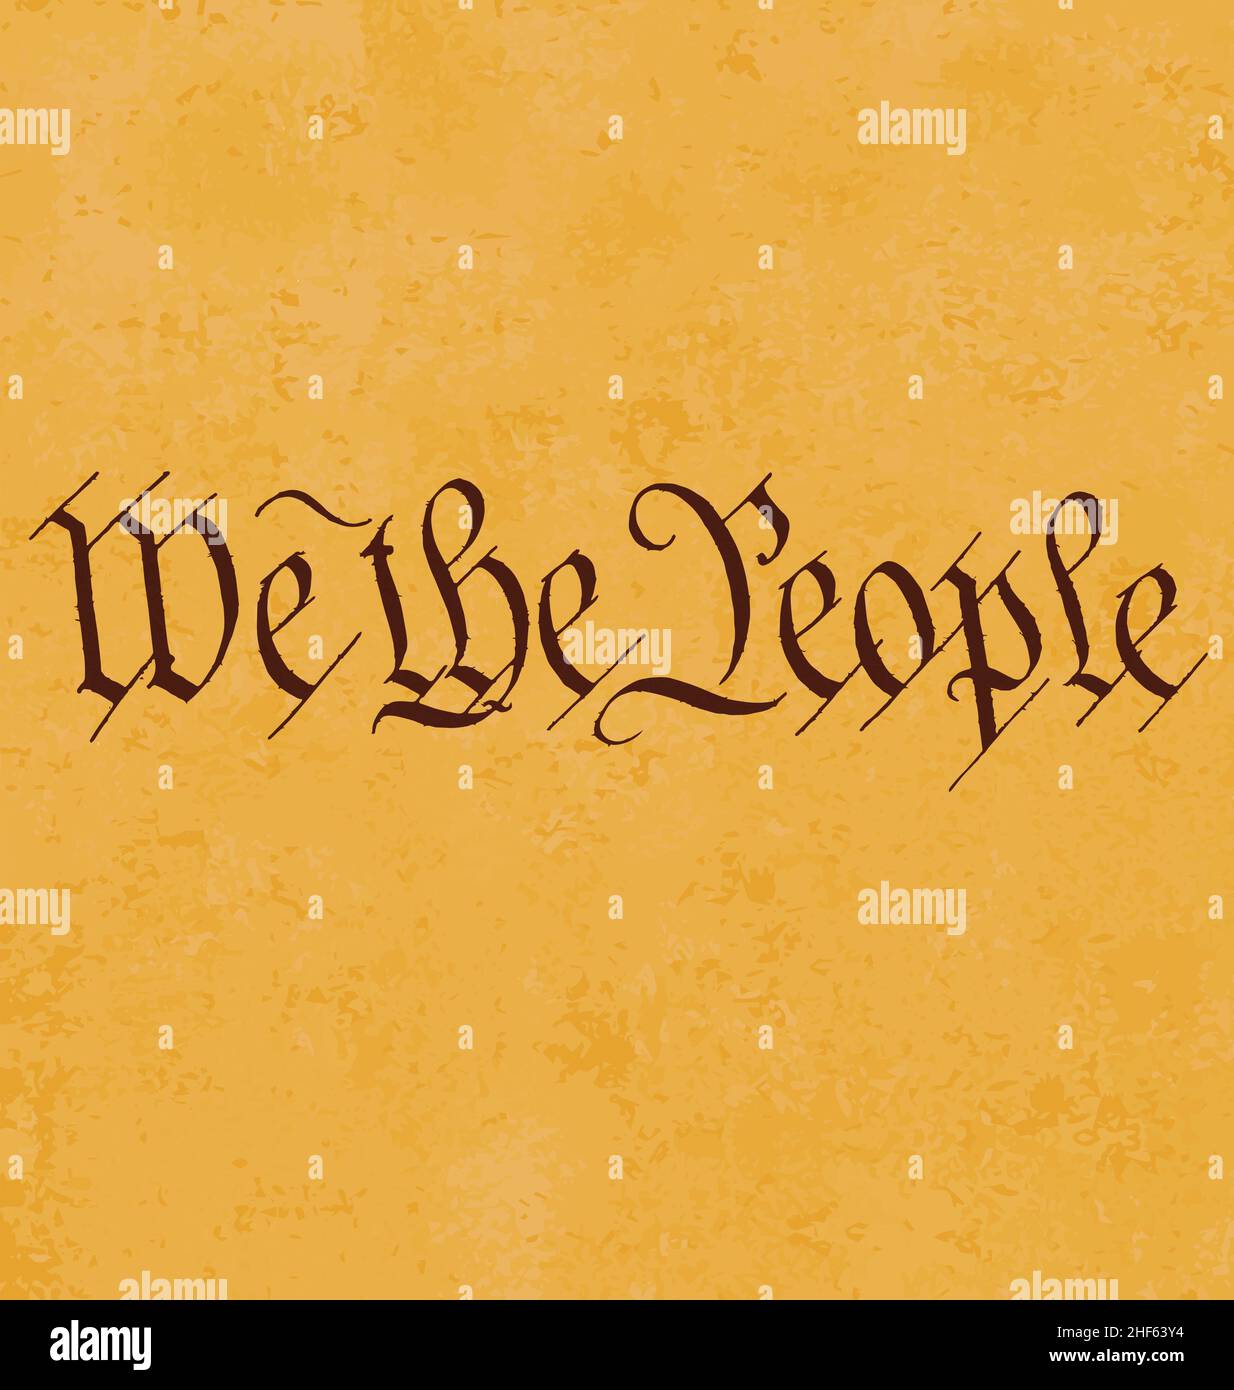 We the People text from the usa constitution vector on old yellowed paper texture background Stock Vector